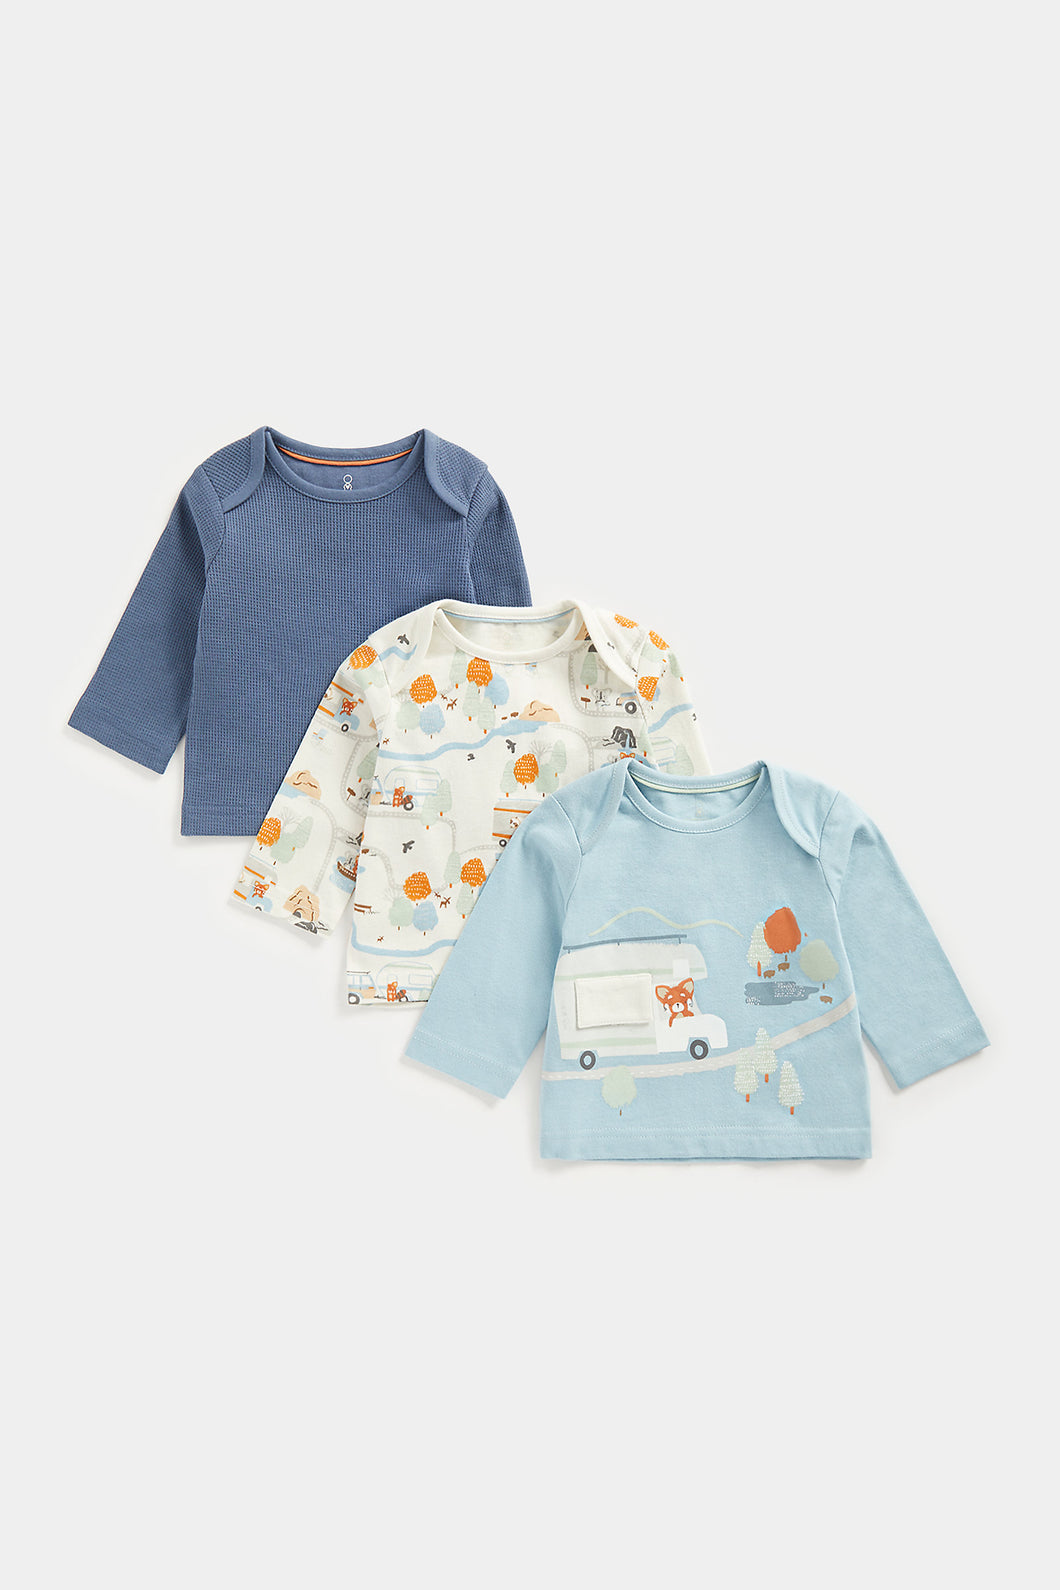 Mothercare Long-Sleeved T-Shirts - 3 Pack